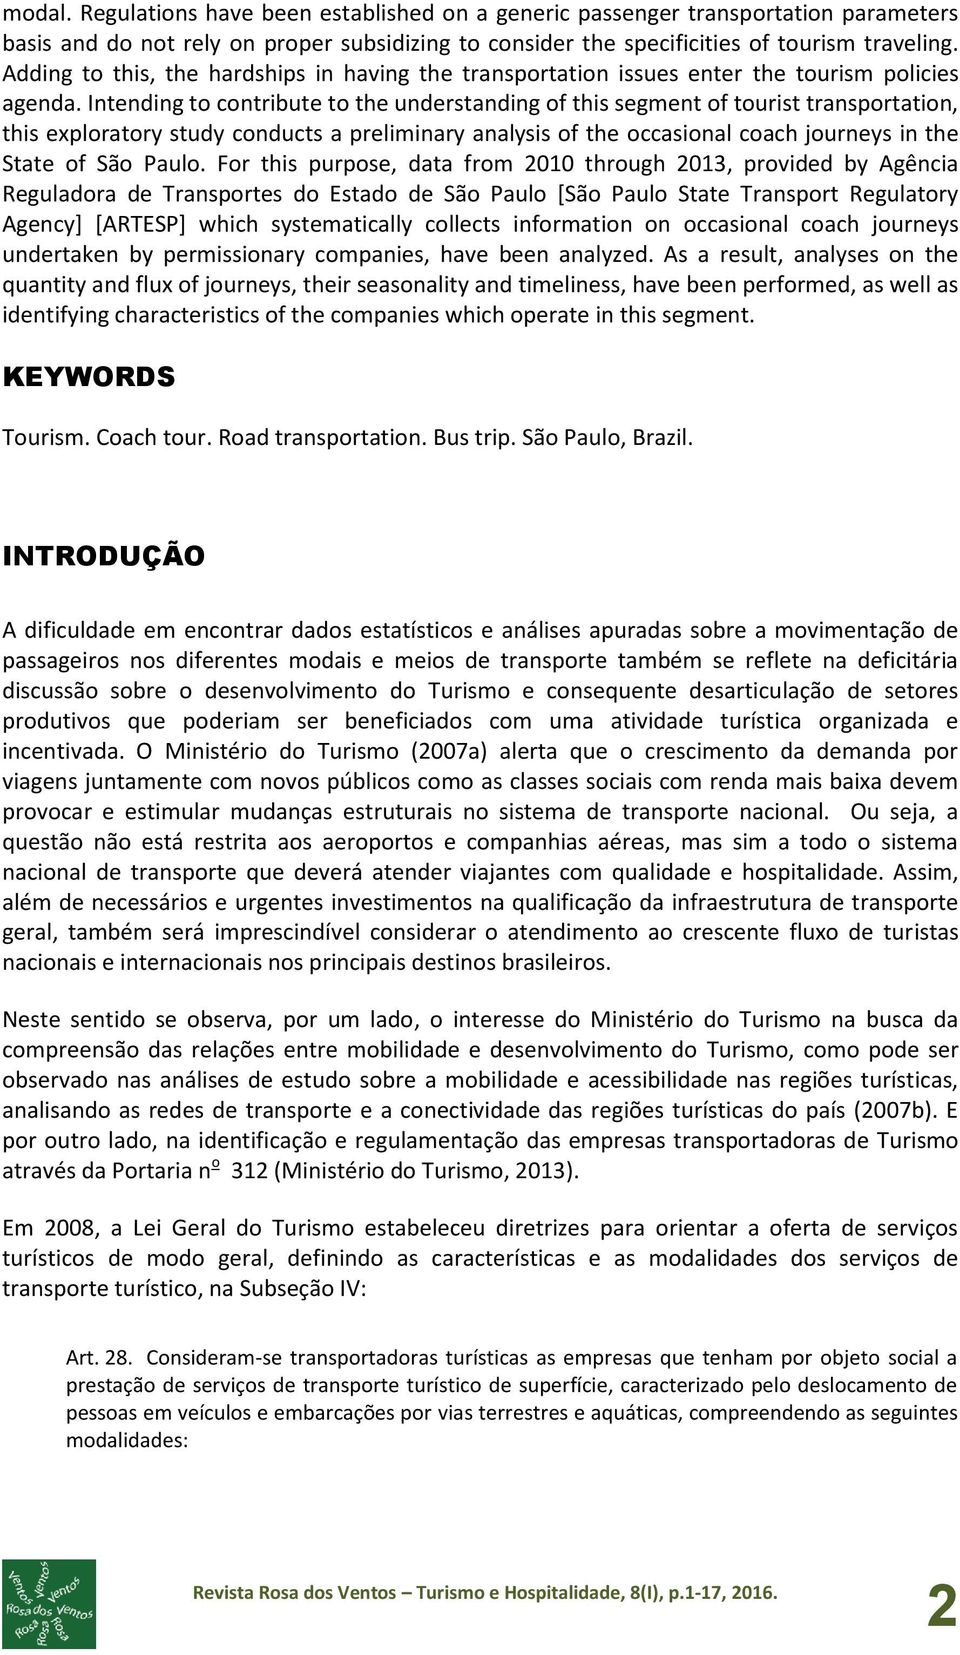 Intending to contribute to the understanding of this segment of tourist transportation, this exploratory study conducts a preliminary analysis of the occasional coach journeys in the State of São